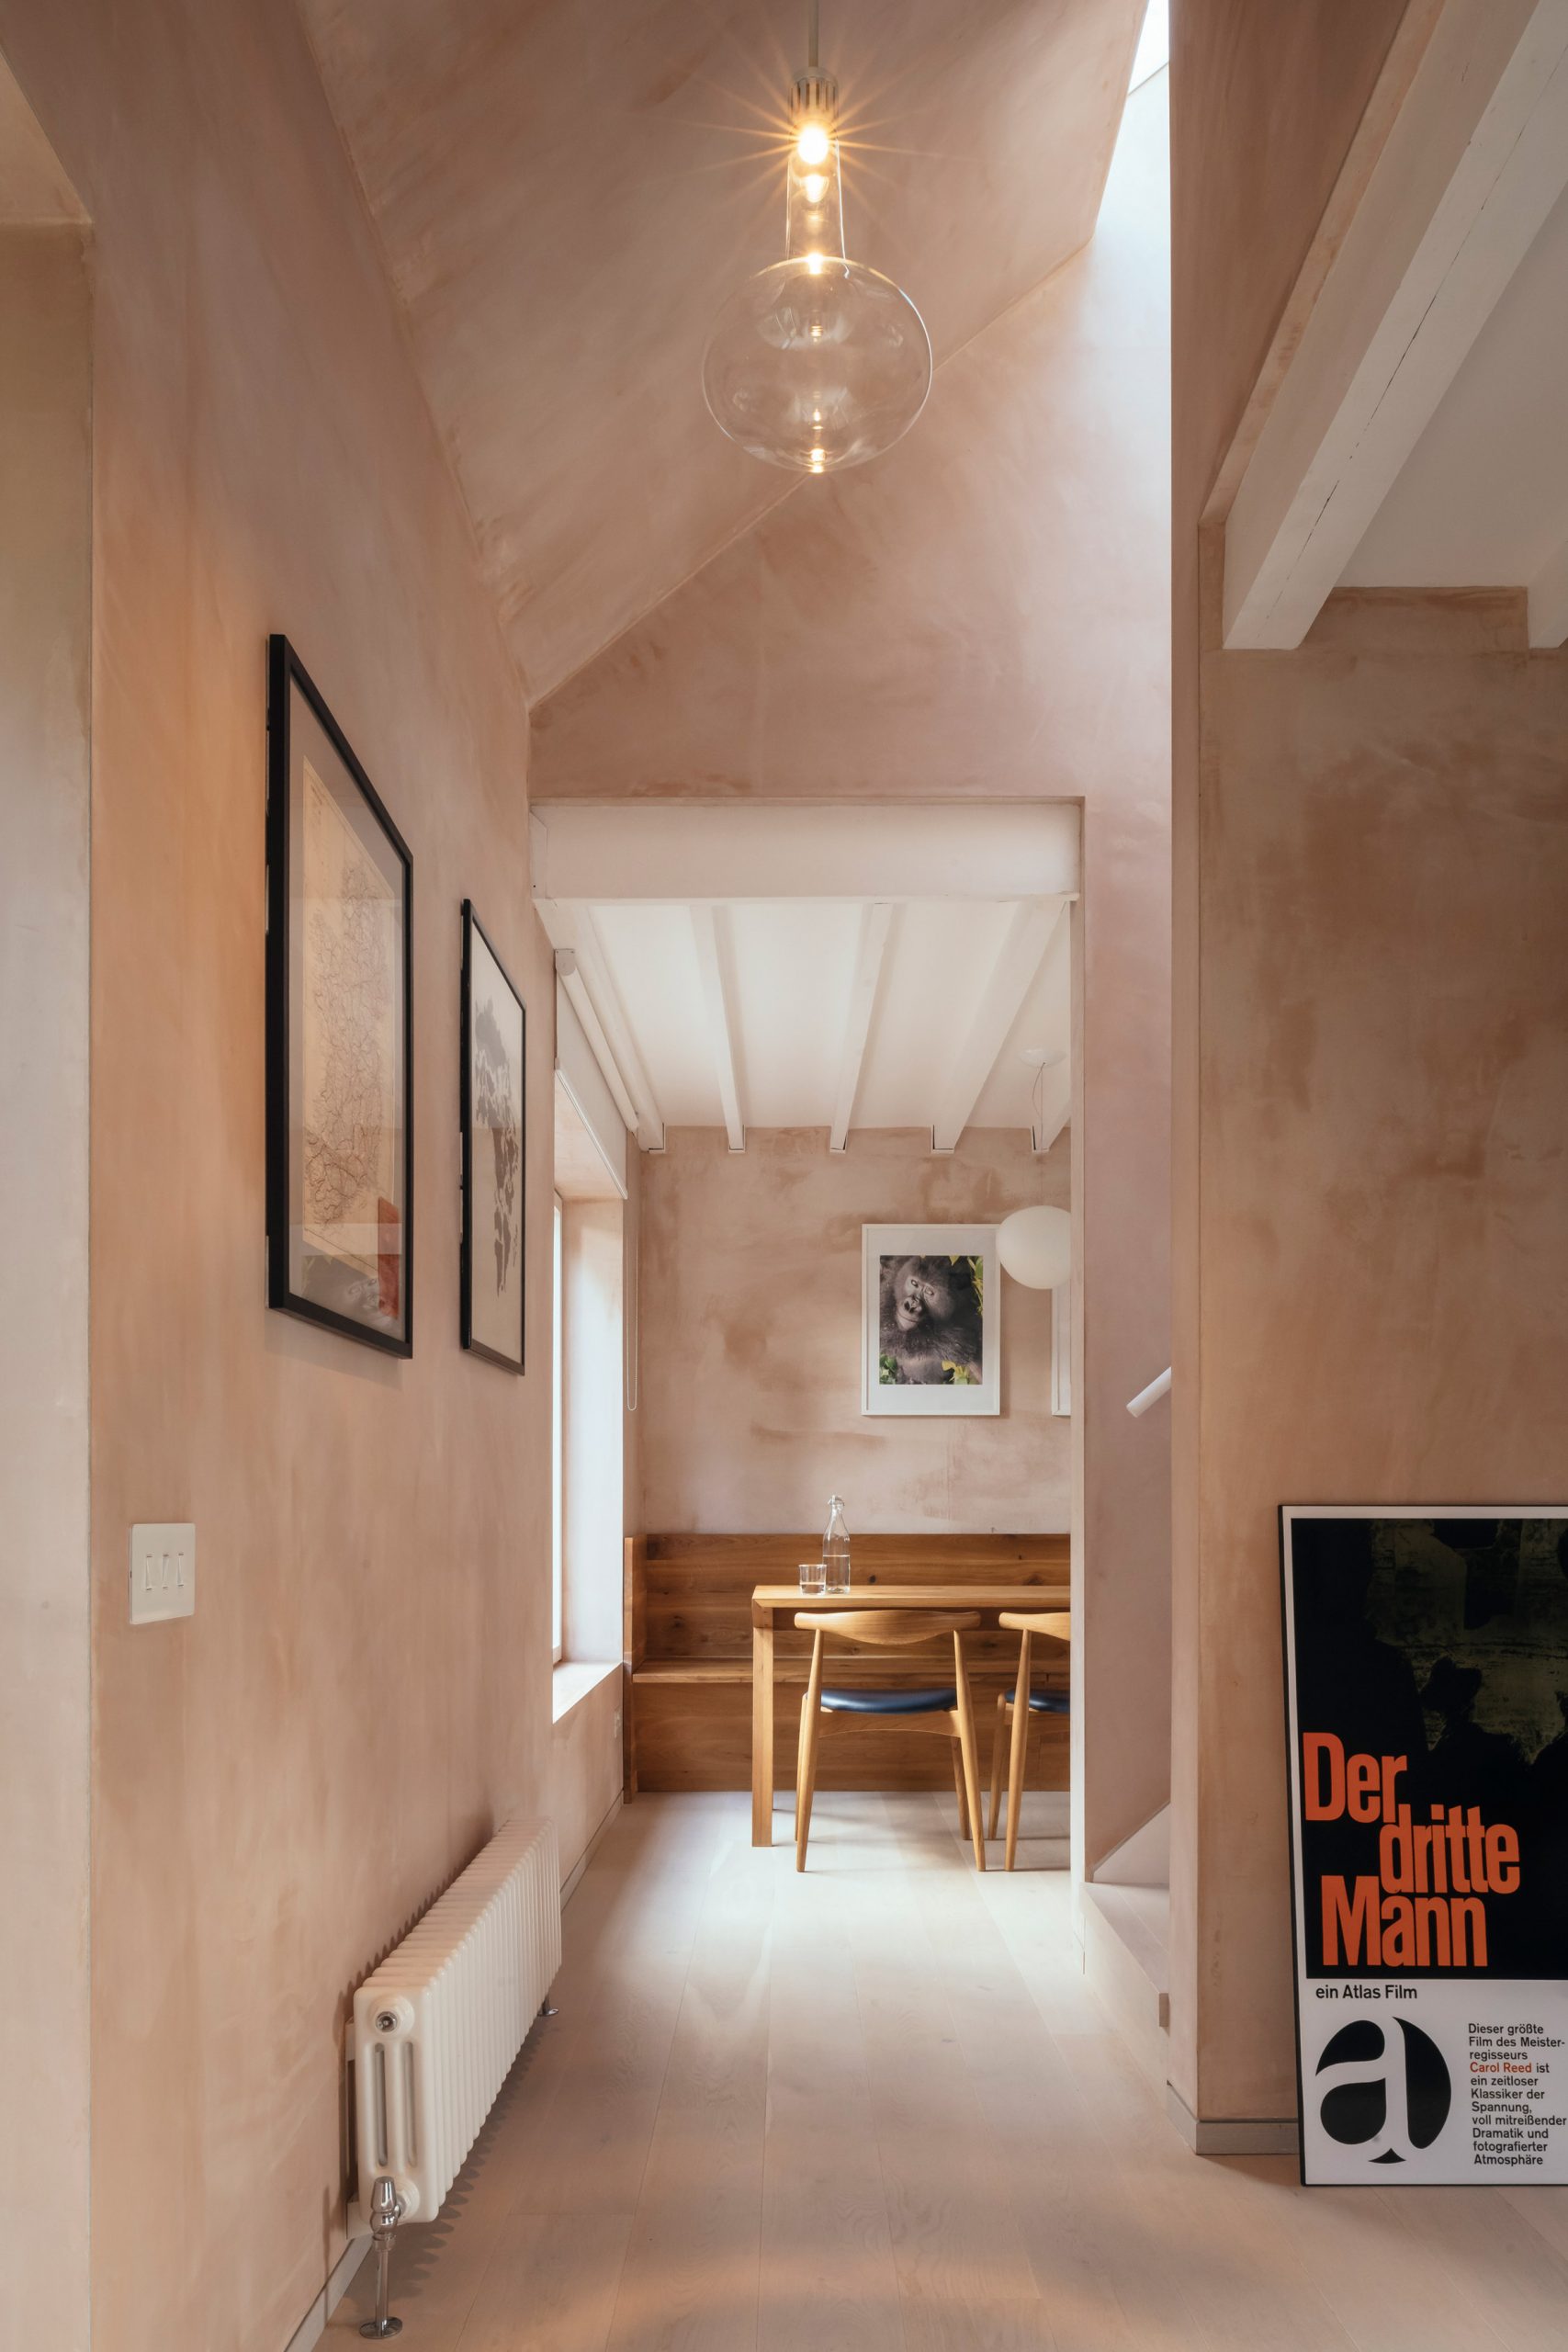 A home interior with pink plaster walls